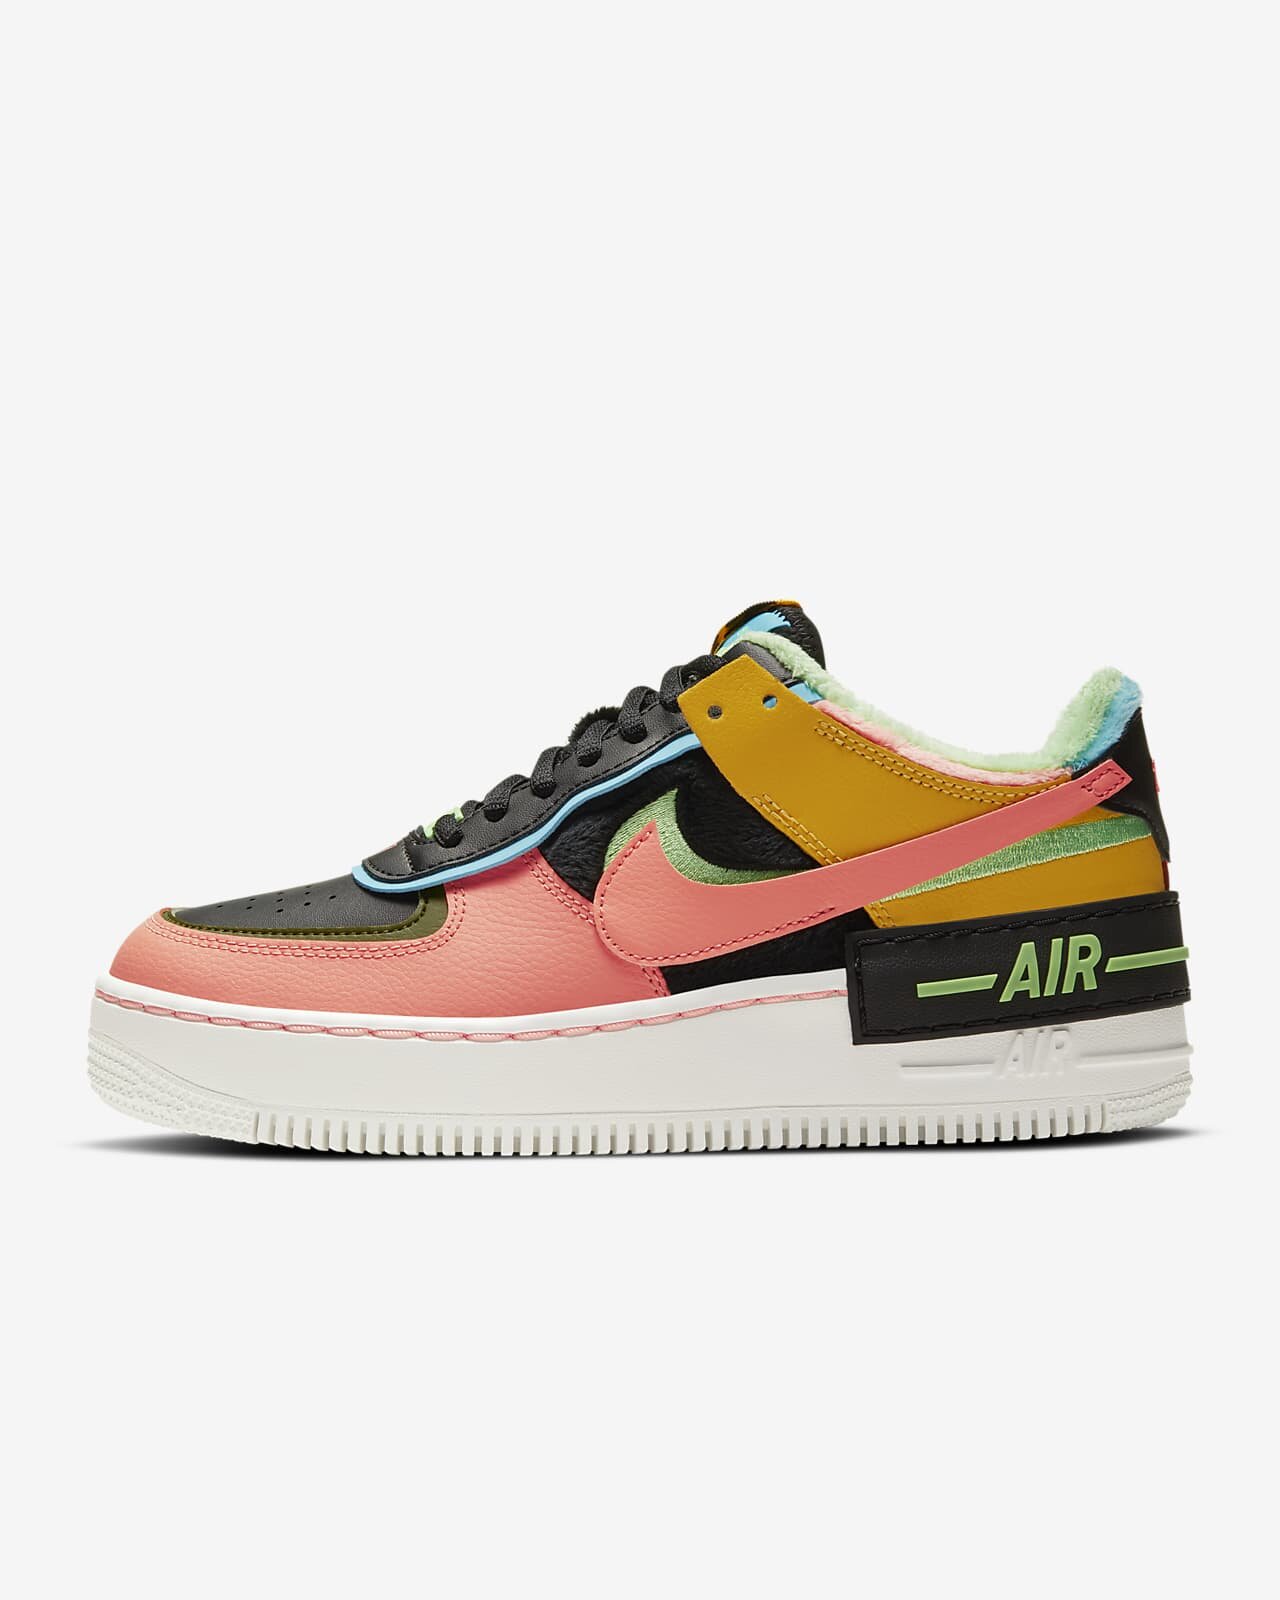 Nike Air Force One - A History — The Sporting Blog